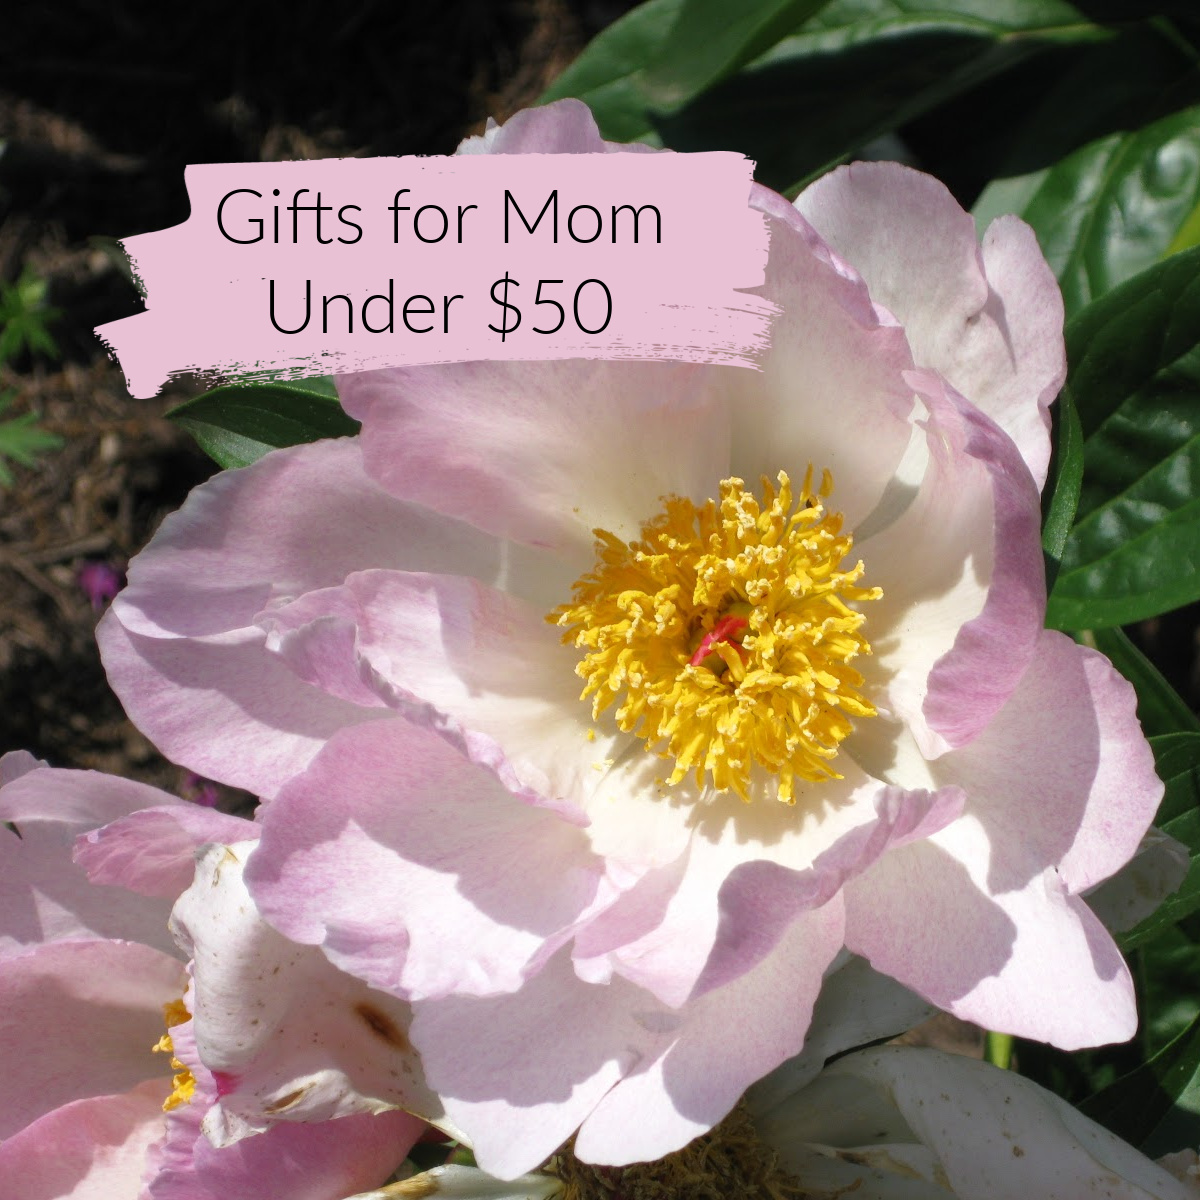 Single peony with text overlay "Gifts for Mom Under $50"